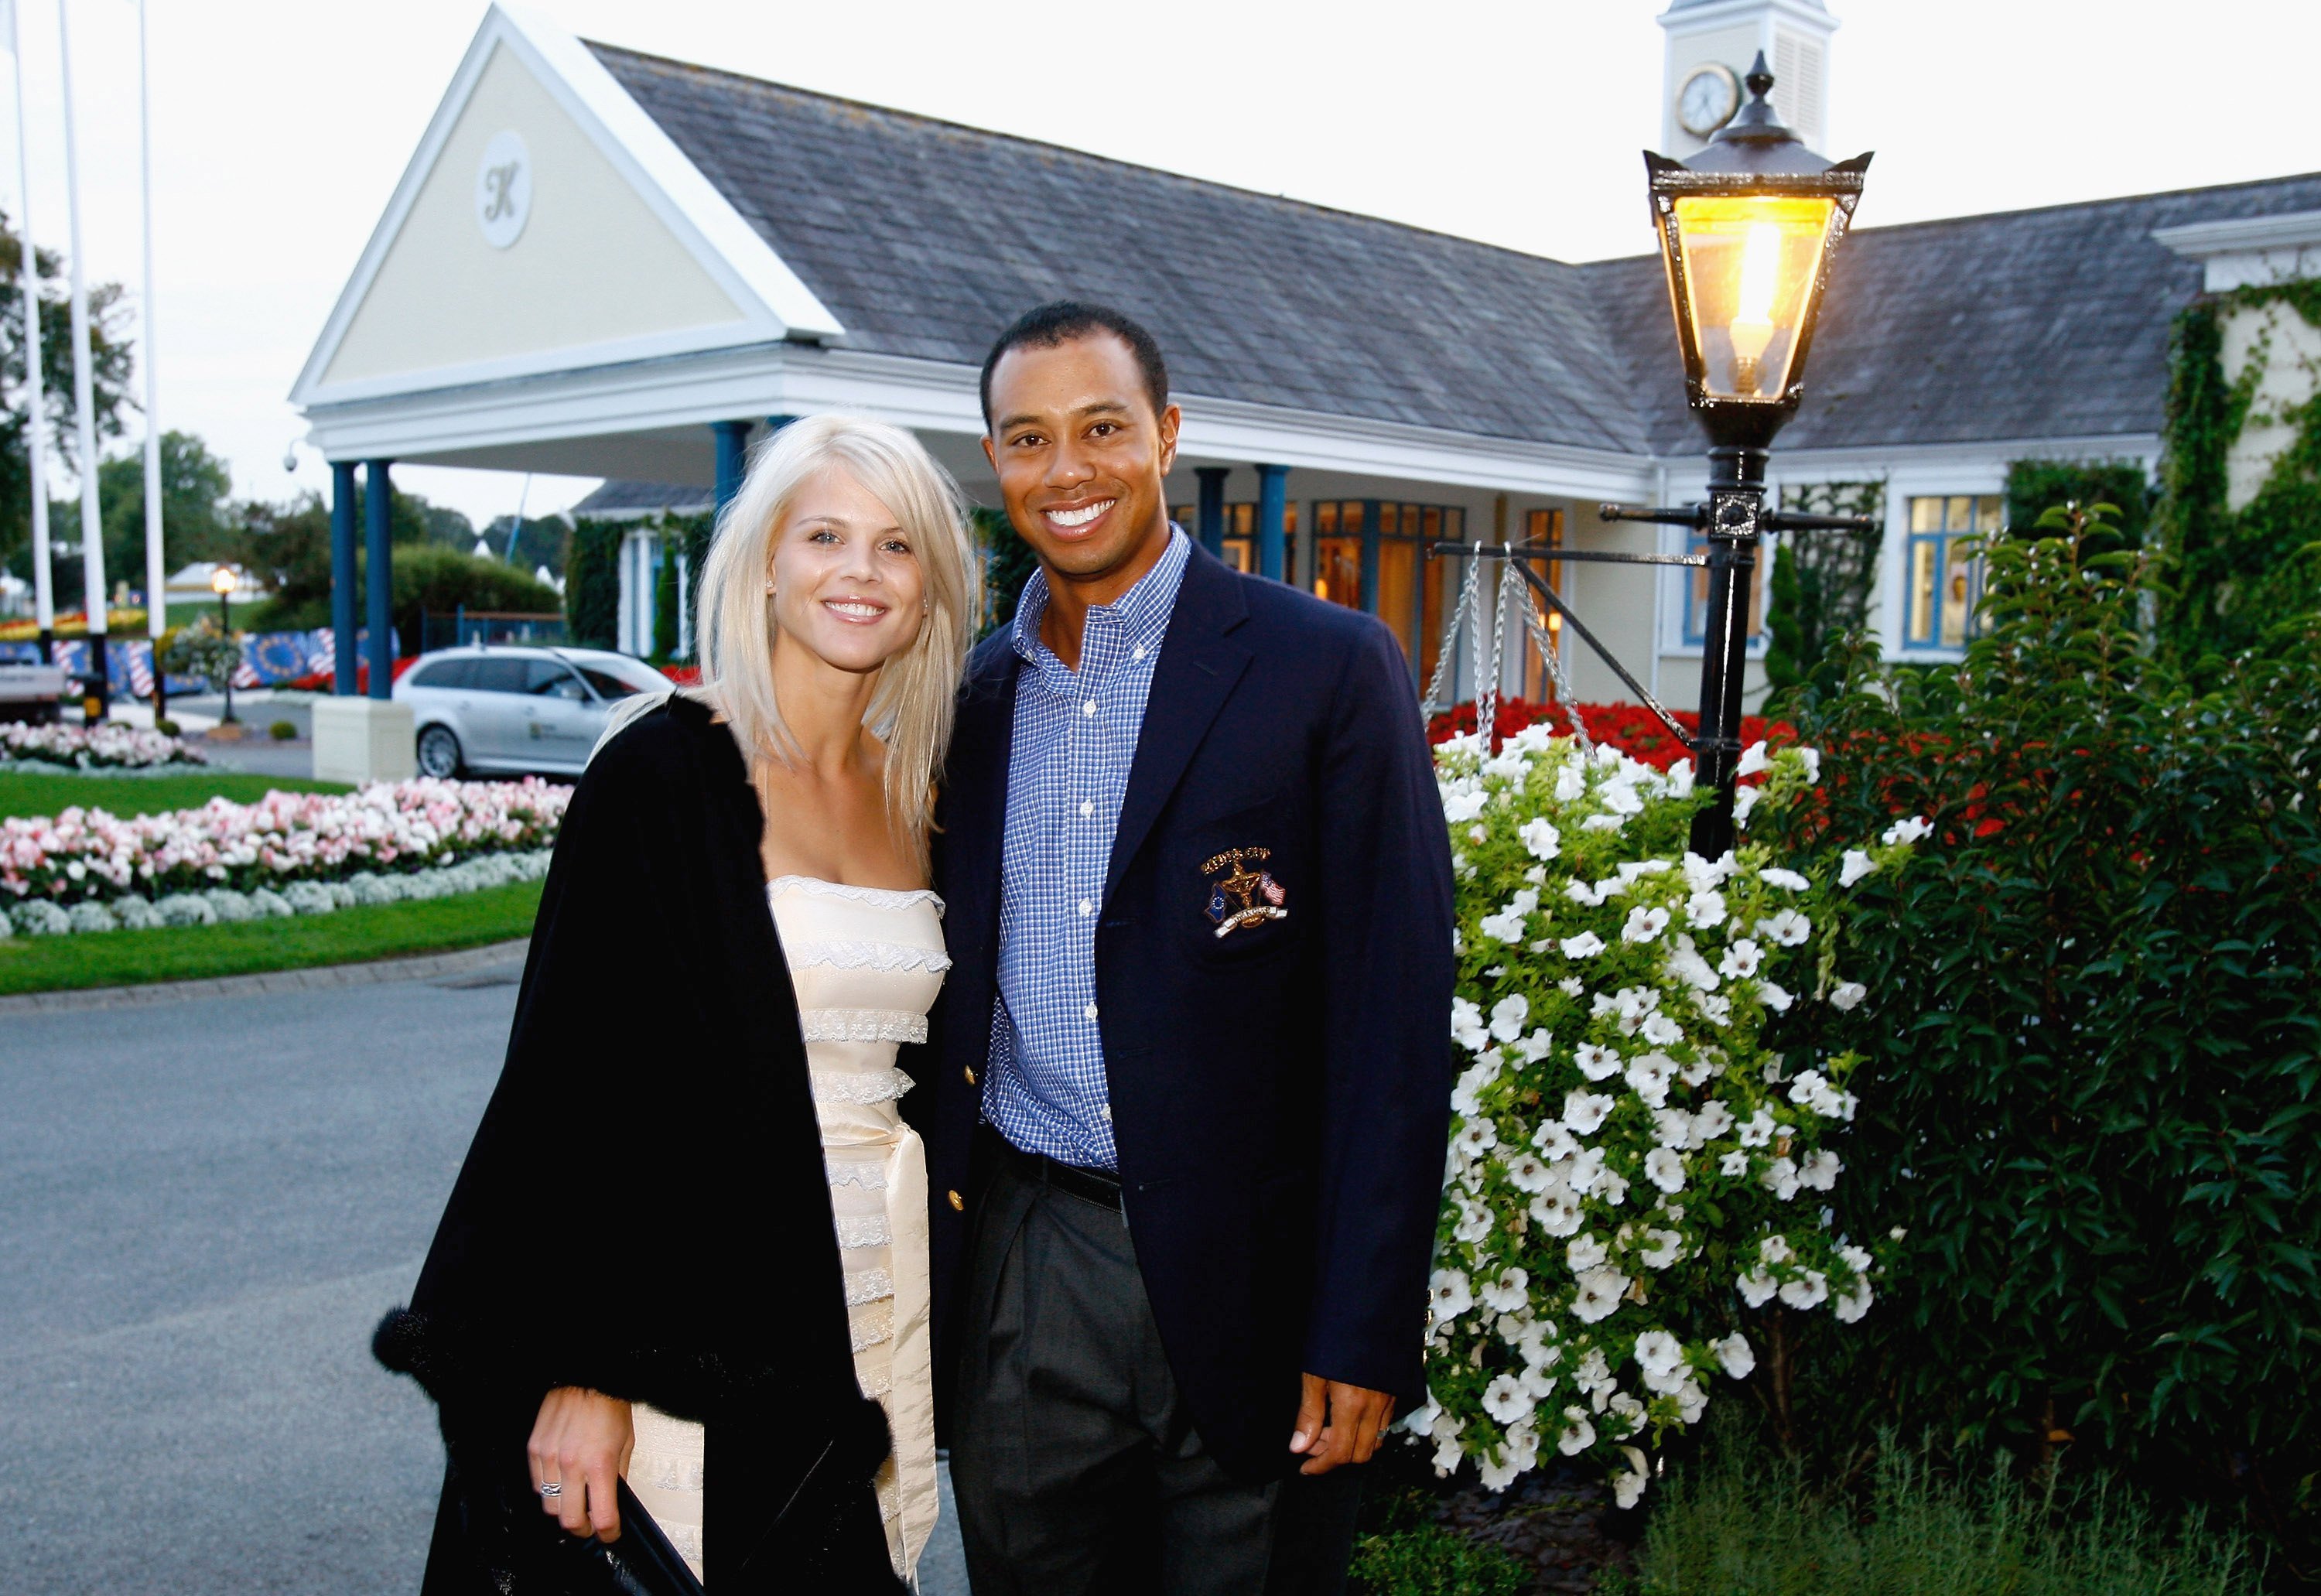 Tiger Woods posing with his wife Elin Nordegren at The Welcome Dinner following the first official practice day of the 2006 Ryder Cup at The K Club on September 19, 2006 in Straffan, Co. Kildare, Ireland. / Source: Getty Images